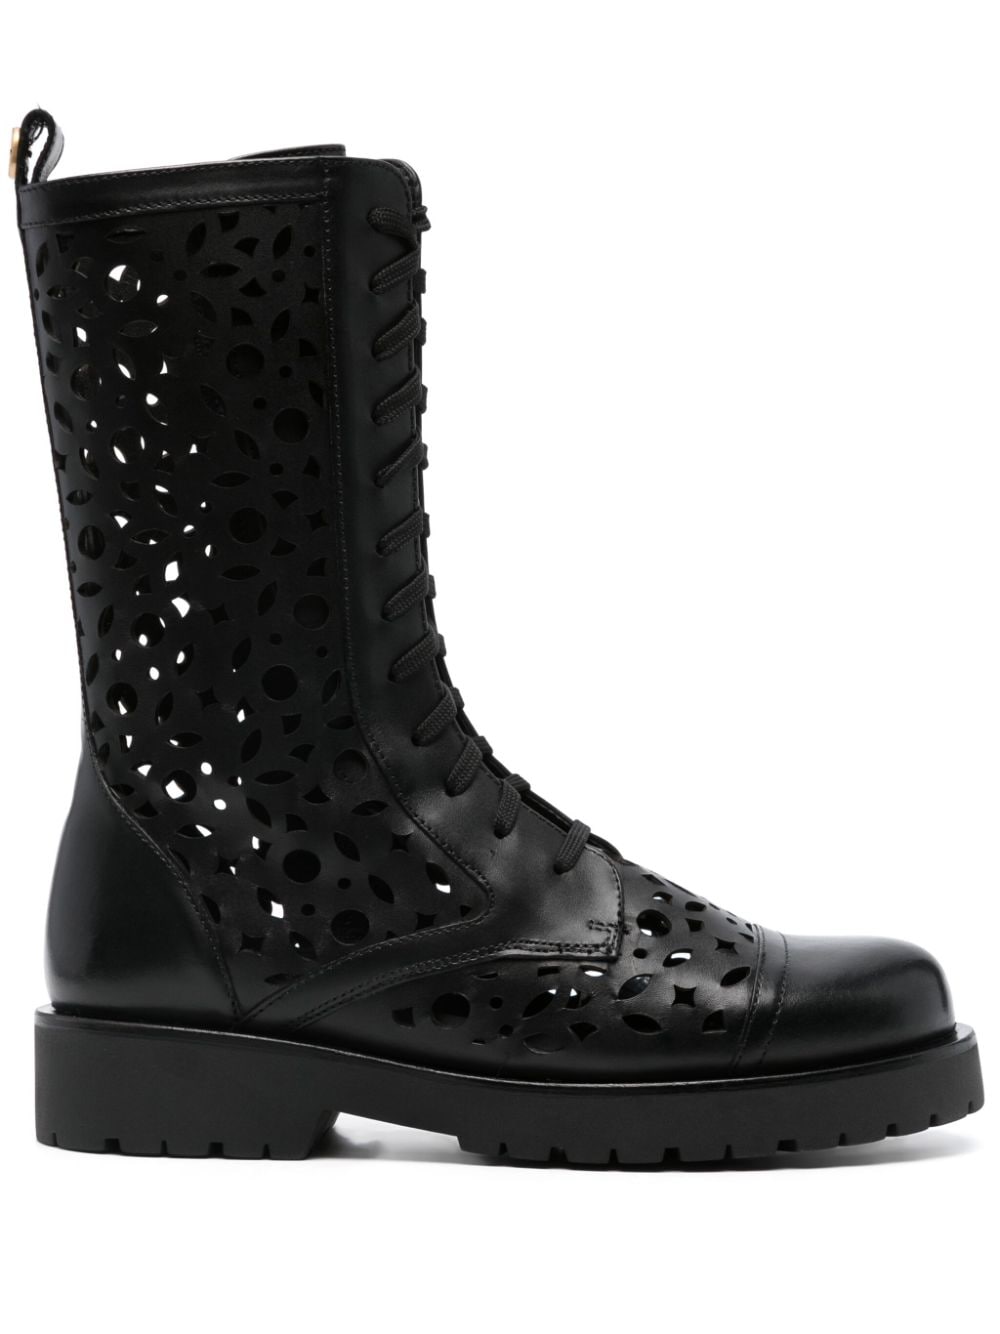 TWINSET Anfibio leather boots - Black von TWINSET